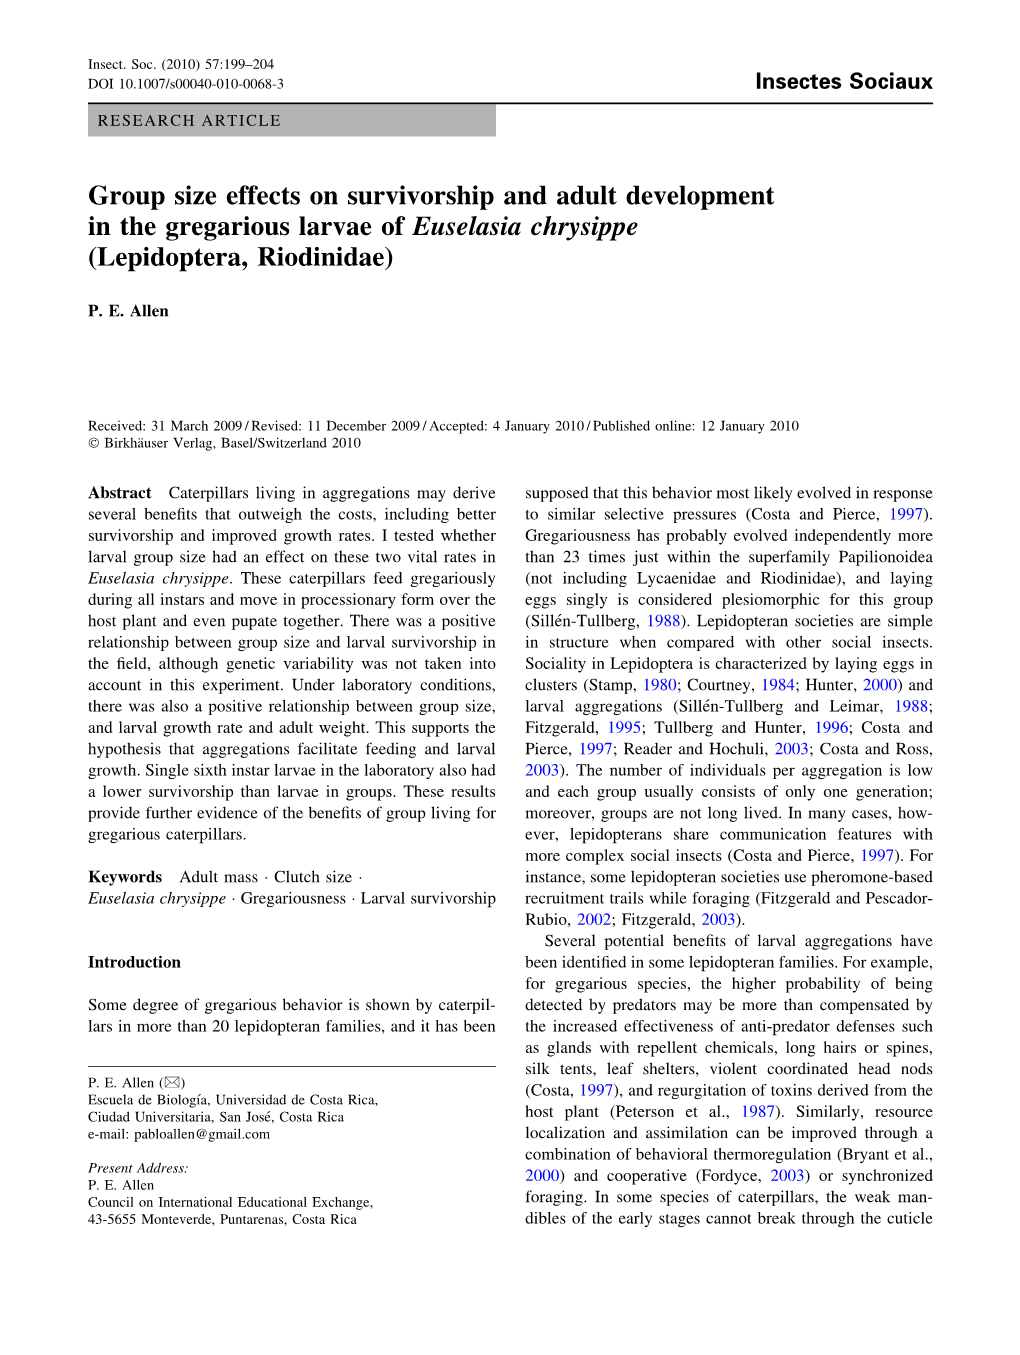 Group Size Effects on Survivorship and Adult Development in the Gregarious Larvae of Euselasia Chrysippe (Lepidoptera, Riodinidae)